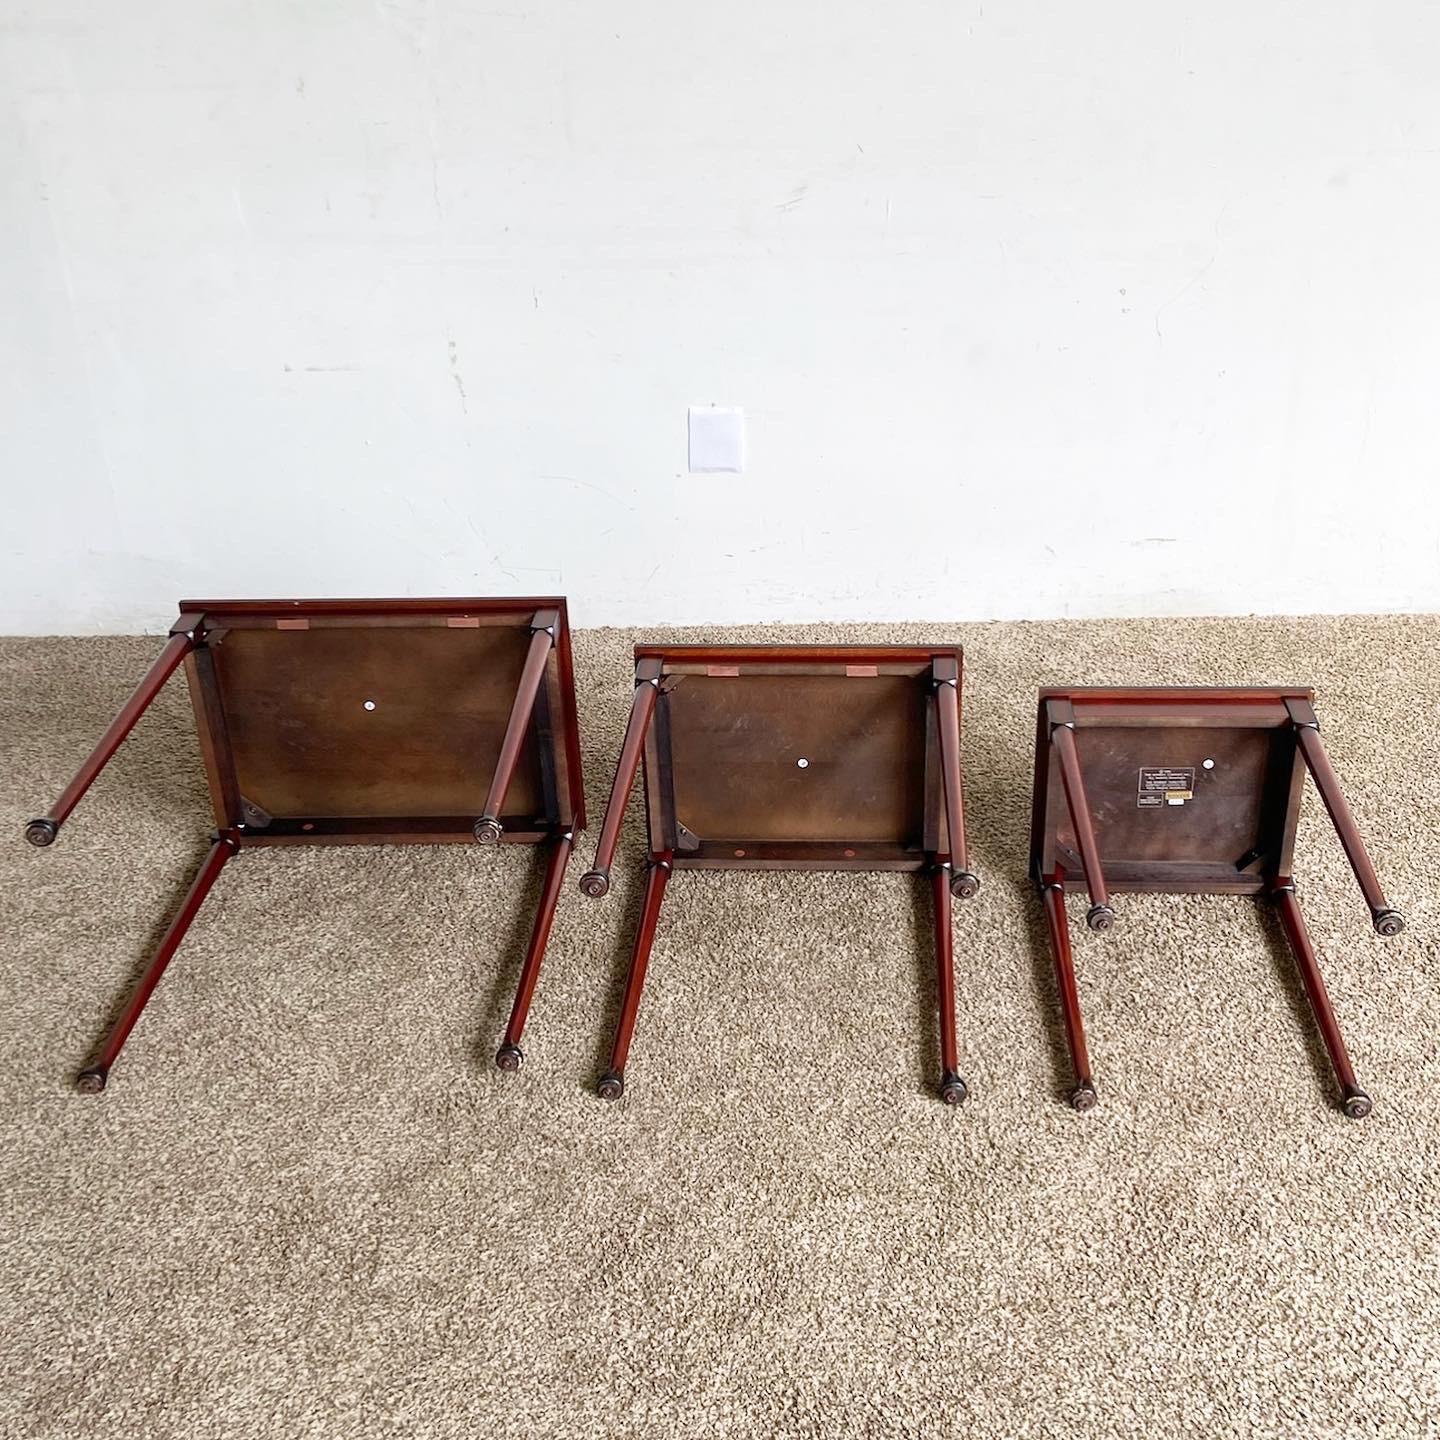 Late 20th Century Traditional Mahogany Nesting Tables From Bombay Company - Set of 3 For Sale